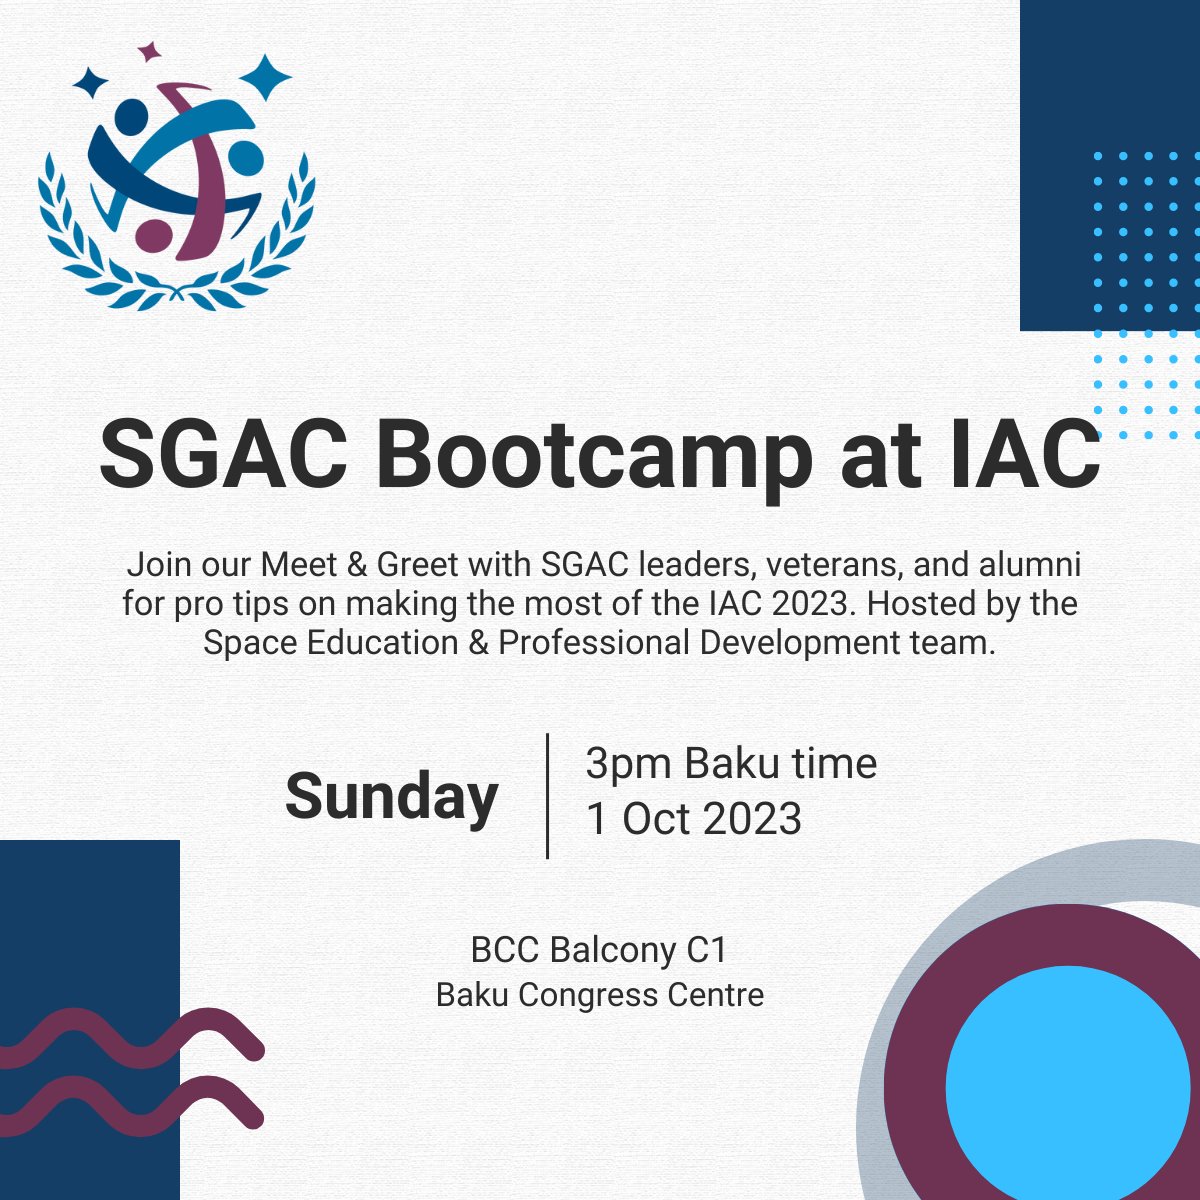 Join The Space Education & Professional Development team organizing a panel at IAC for SGAC members. Date/Time: 1 Oct Sunday at 3pm Baku time Venue: BCC Balcony C1, Baku Congress Centre Programme: Panel session + short networking session Register at: eventbrite.co.uk/e/sgac-bootcam…